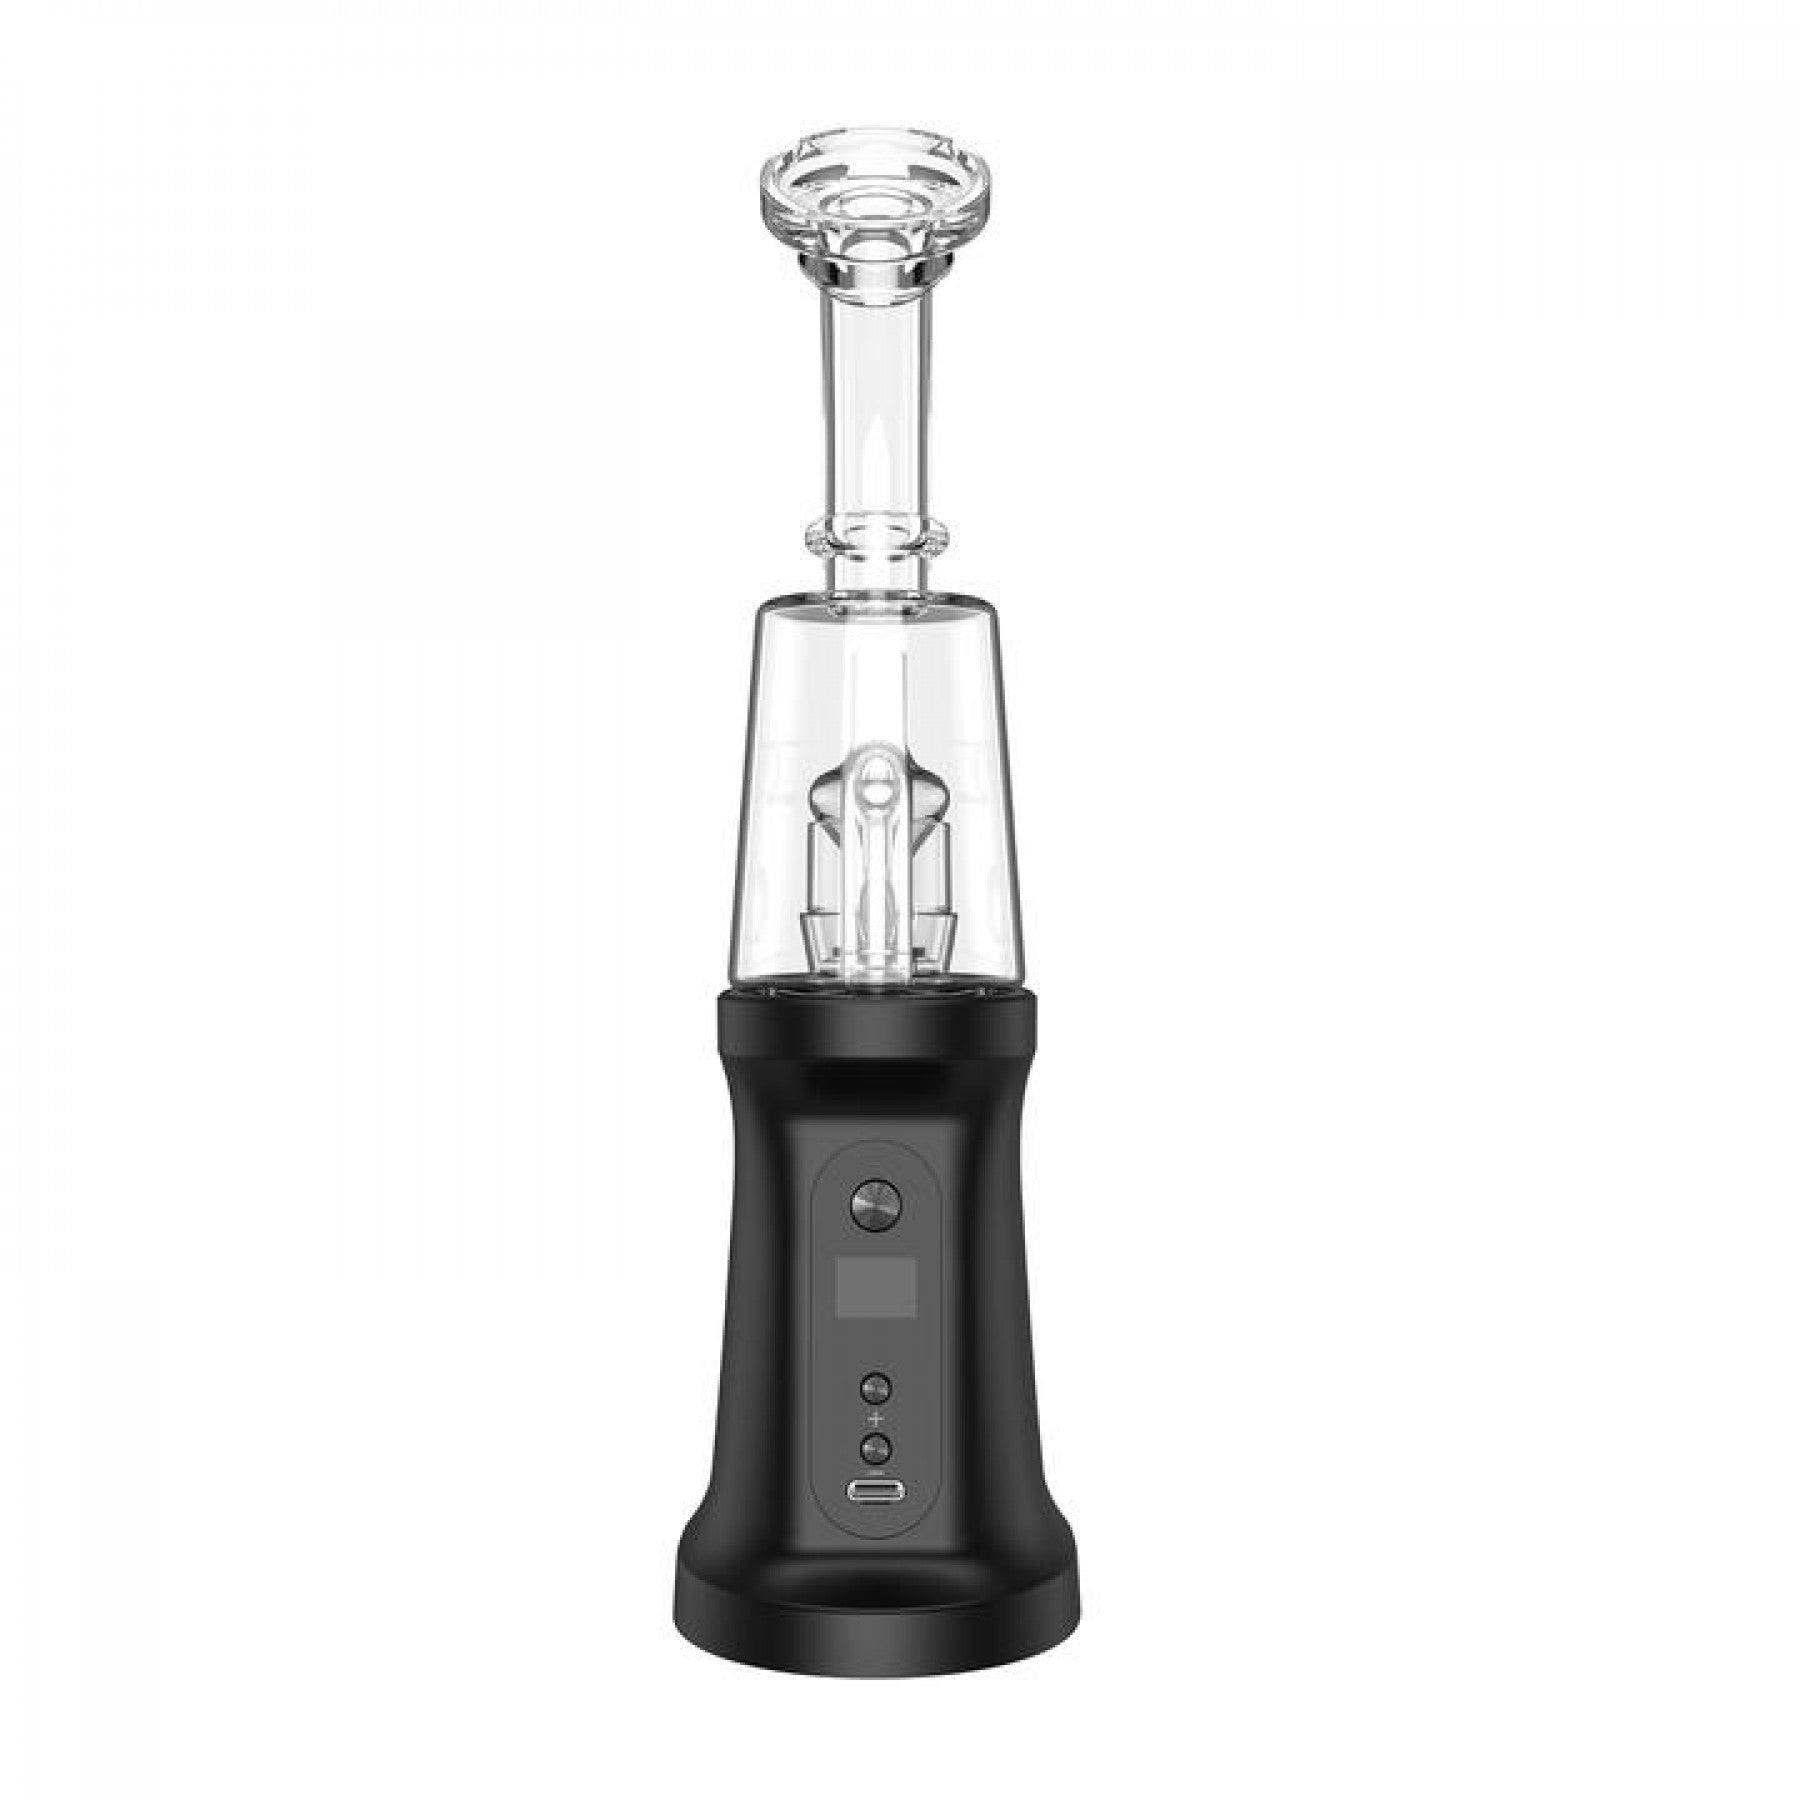 Ispire Daab | Portable Induction Heating Dab Device | Portable Dab Device | Induction Heating Dabbing | Concentrate Vaporizer | Dabbing Tool | Portable Concentrate Device | Dabbing Revolution | Vaporizer Tech | Handheld Rig | One Love Hemp Company | Vancouver | Canada